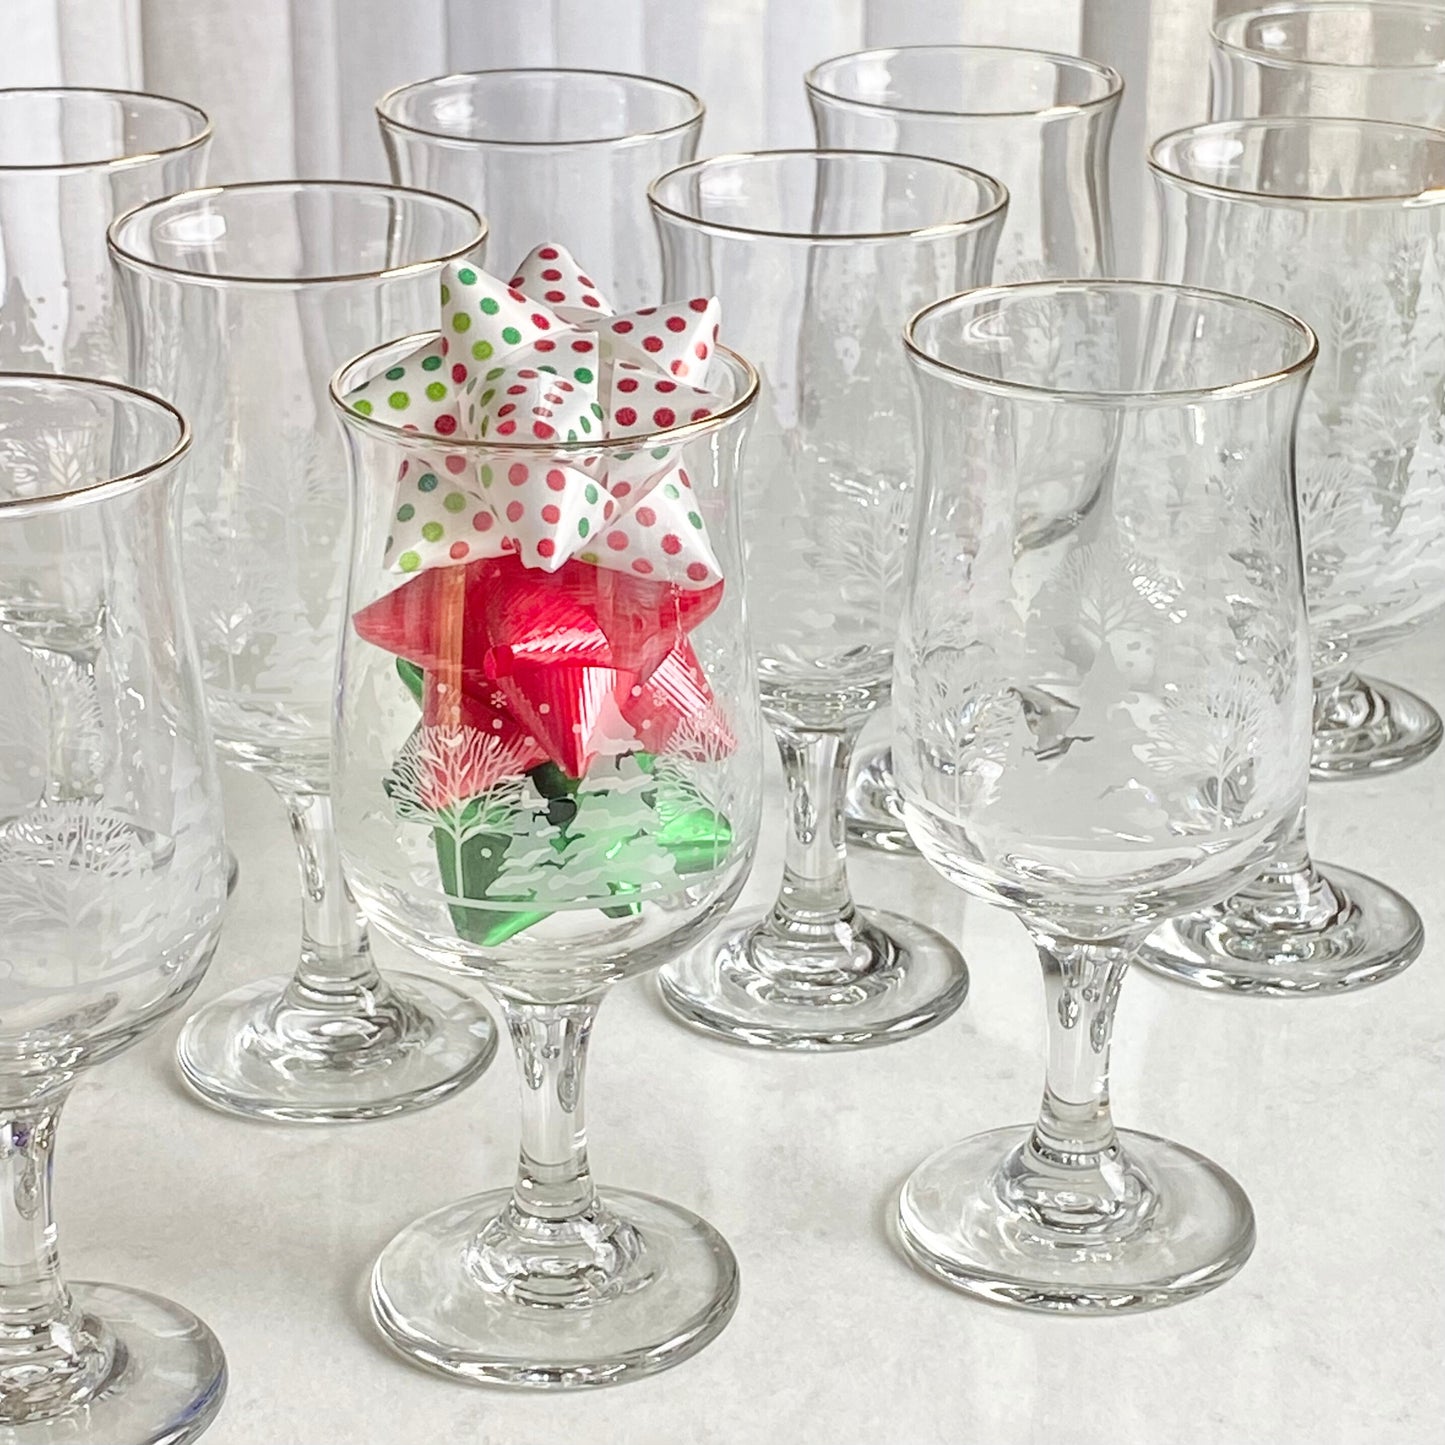 Vintage Lynn's Christmas Pines Glasses Made for Arby's - Set of 10 (#10B)